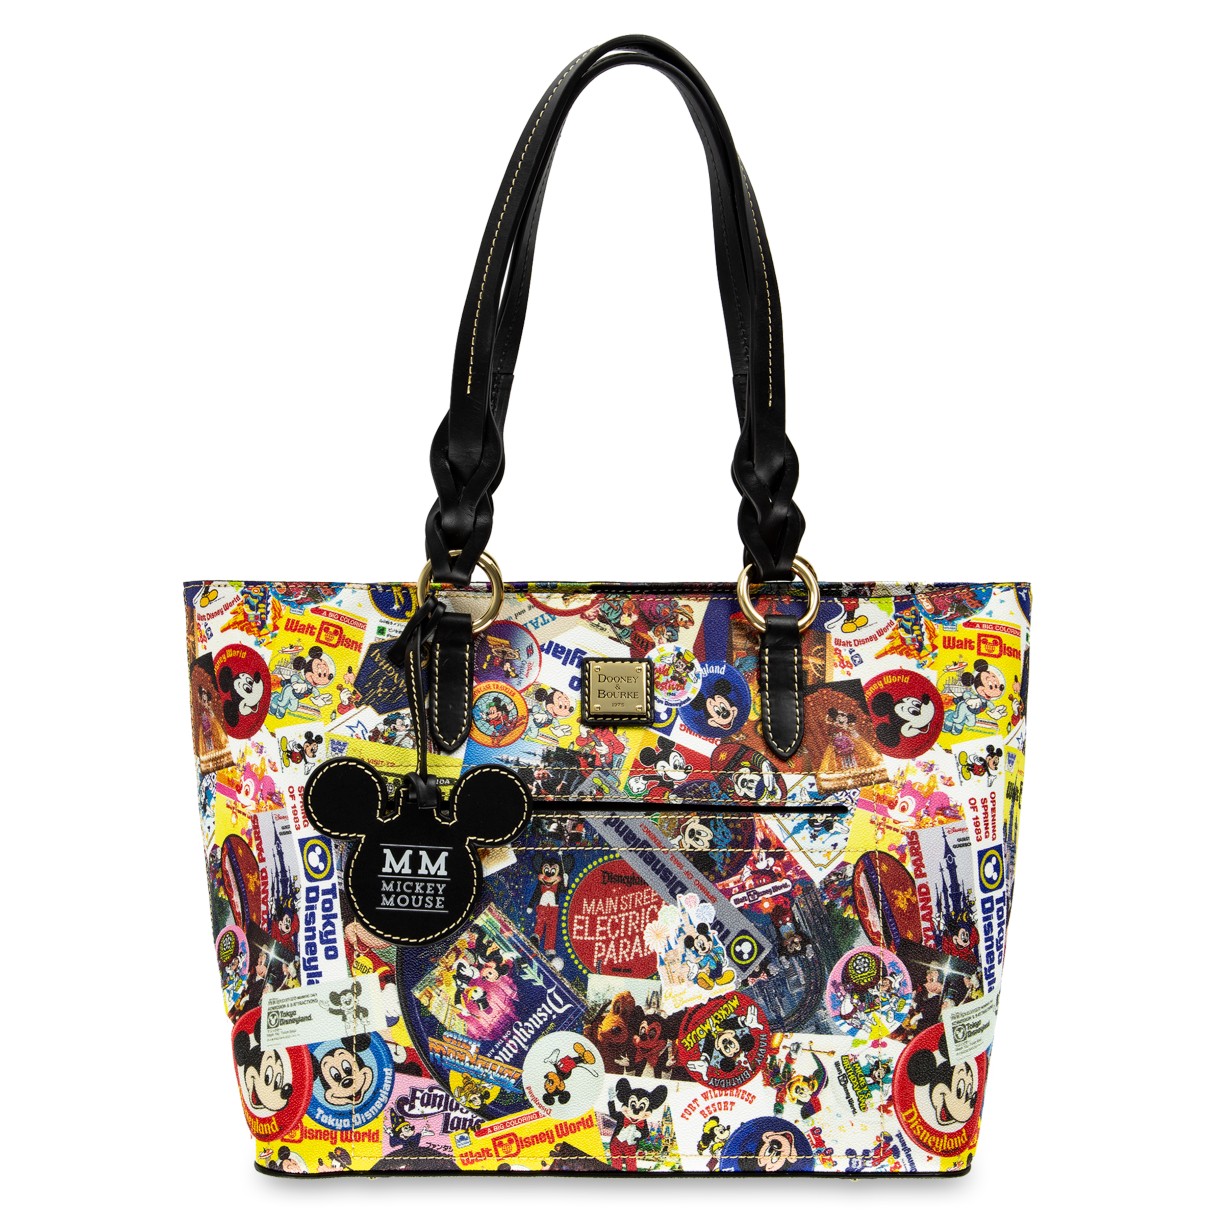 Mickey Mouse Tote Bag by Dooney & Bourke